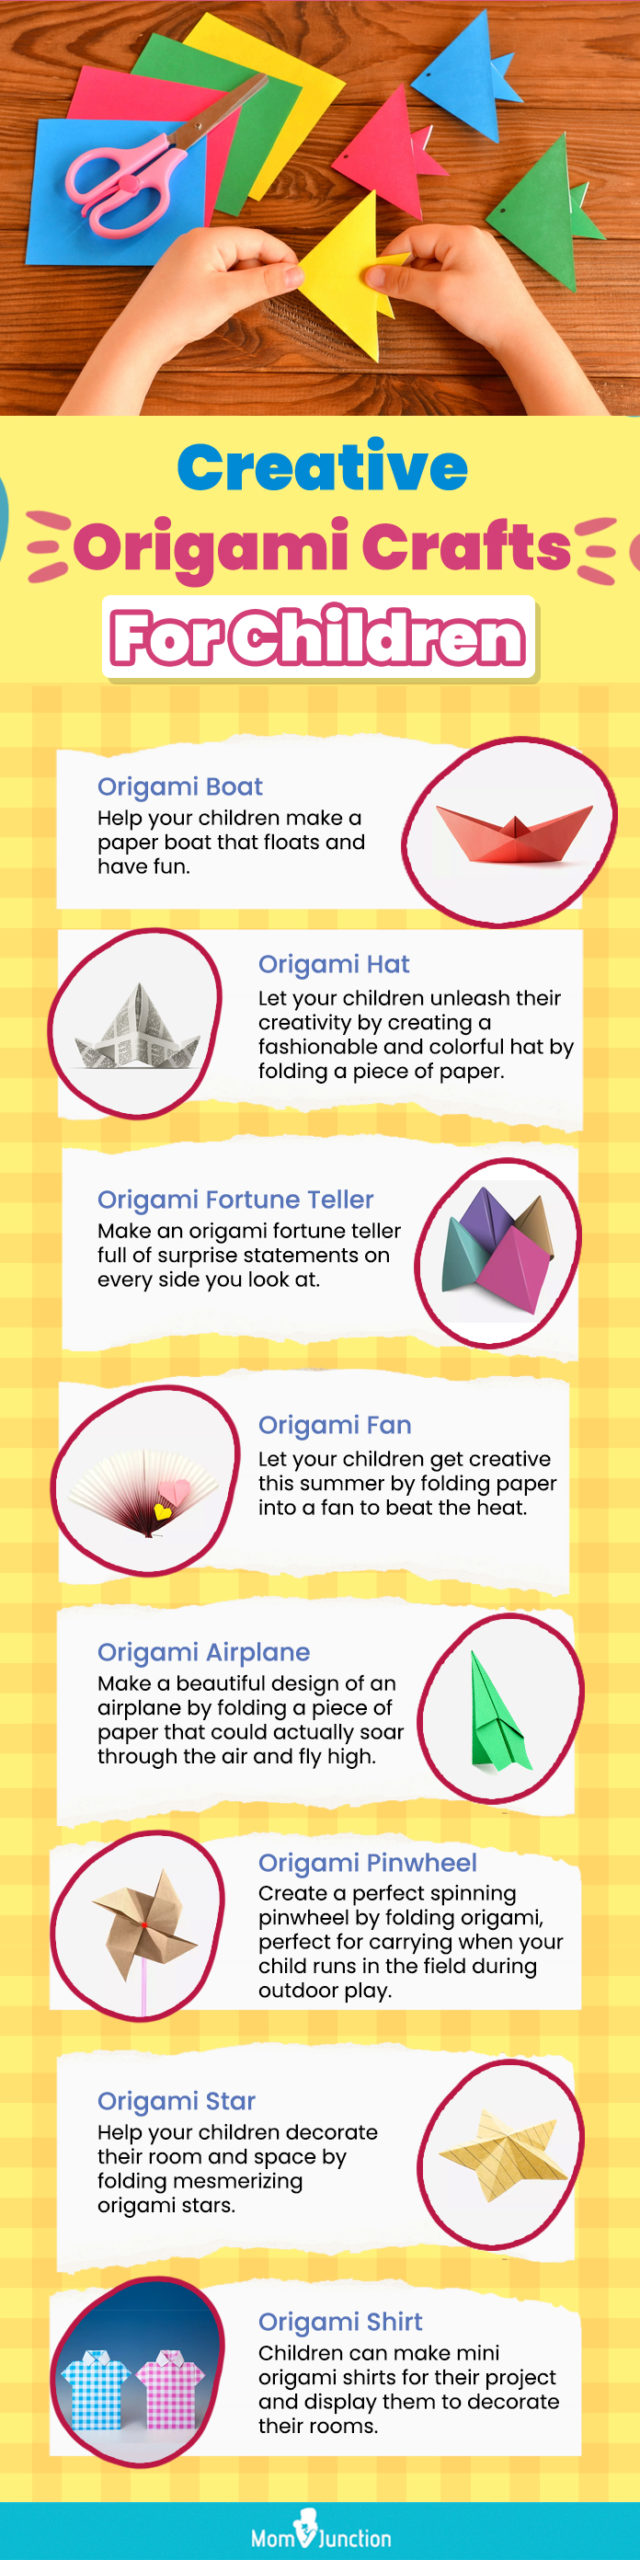 creative origami crafts for children (infographic)